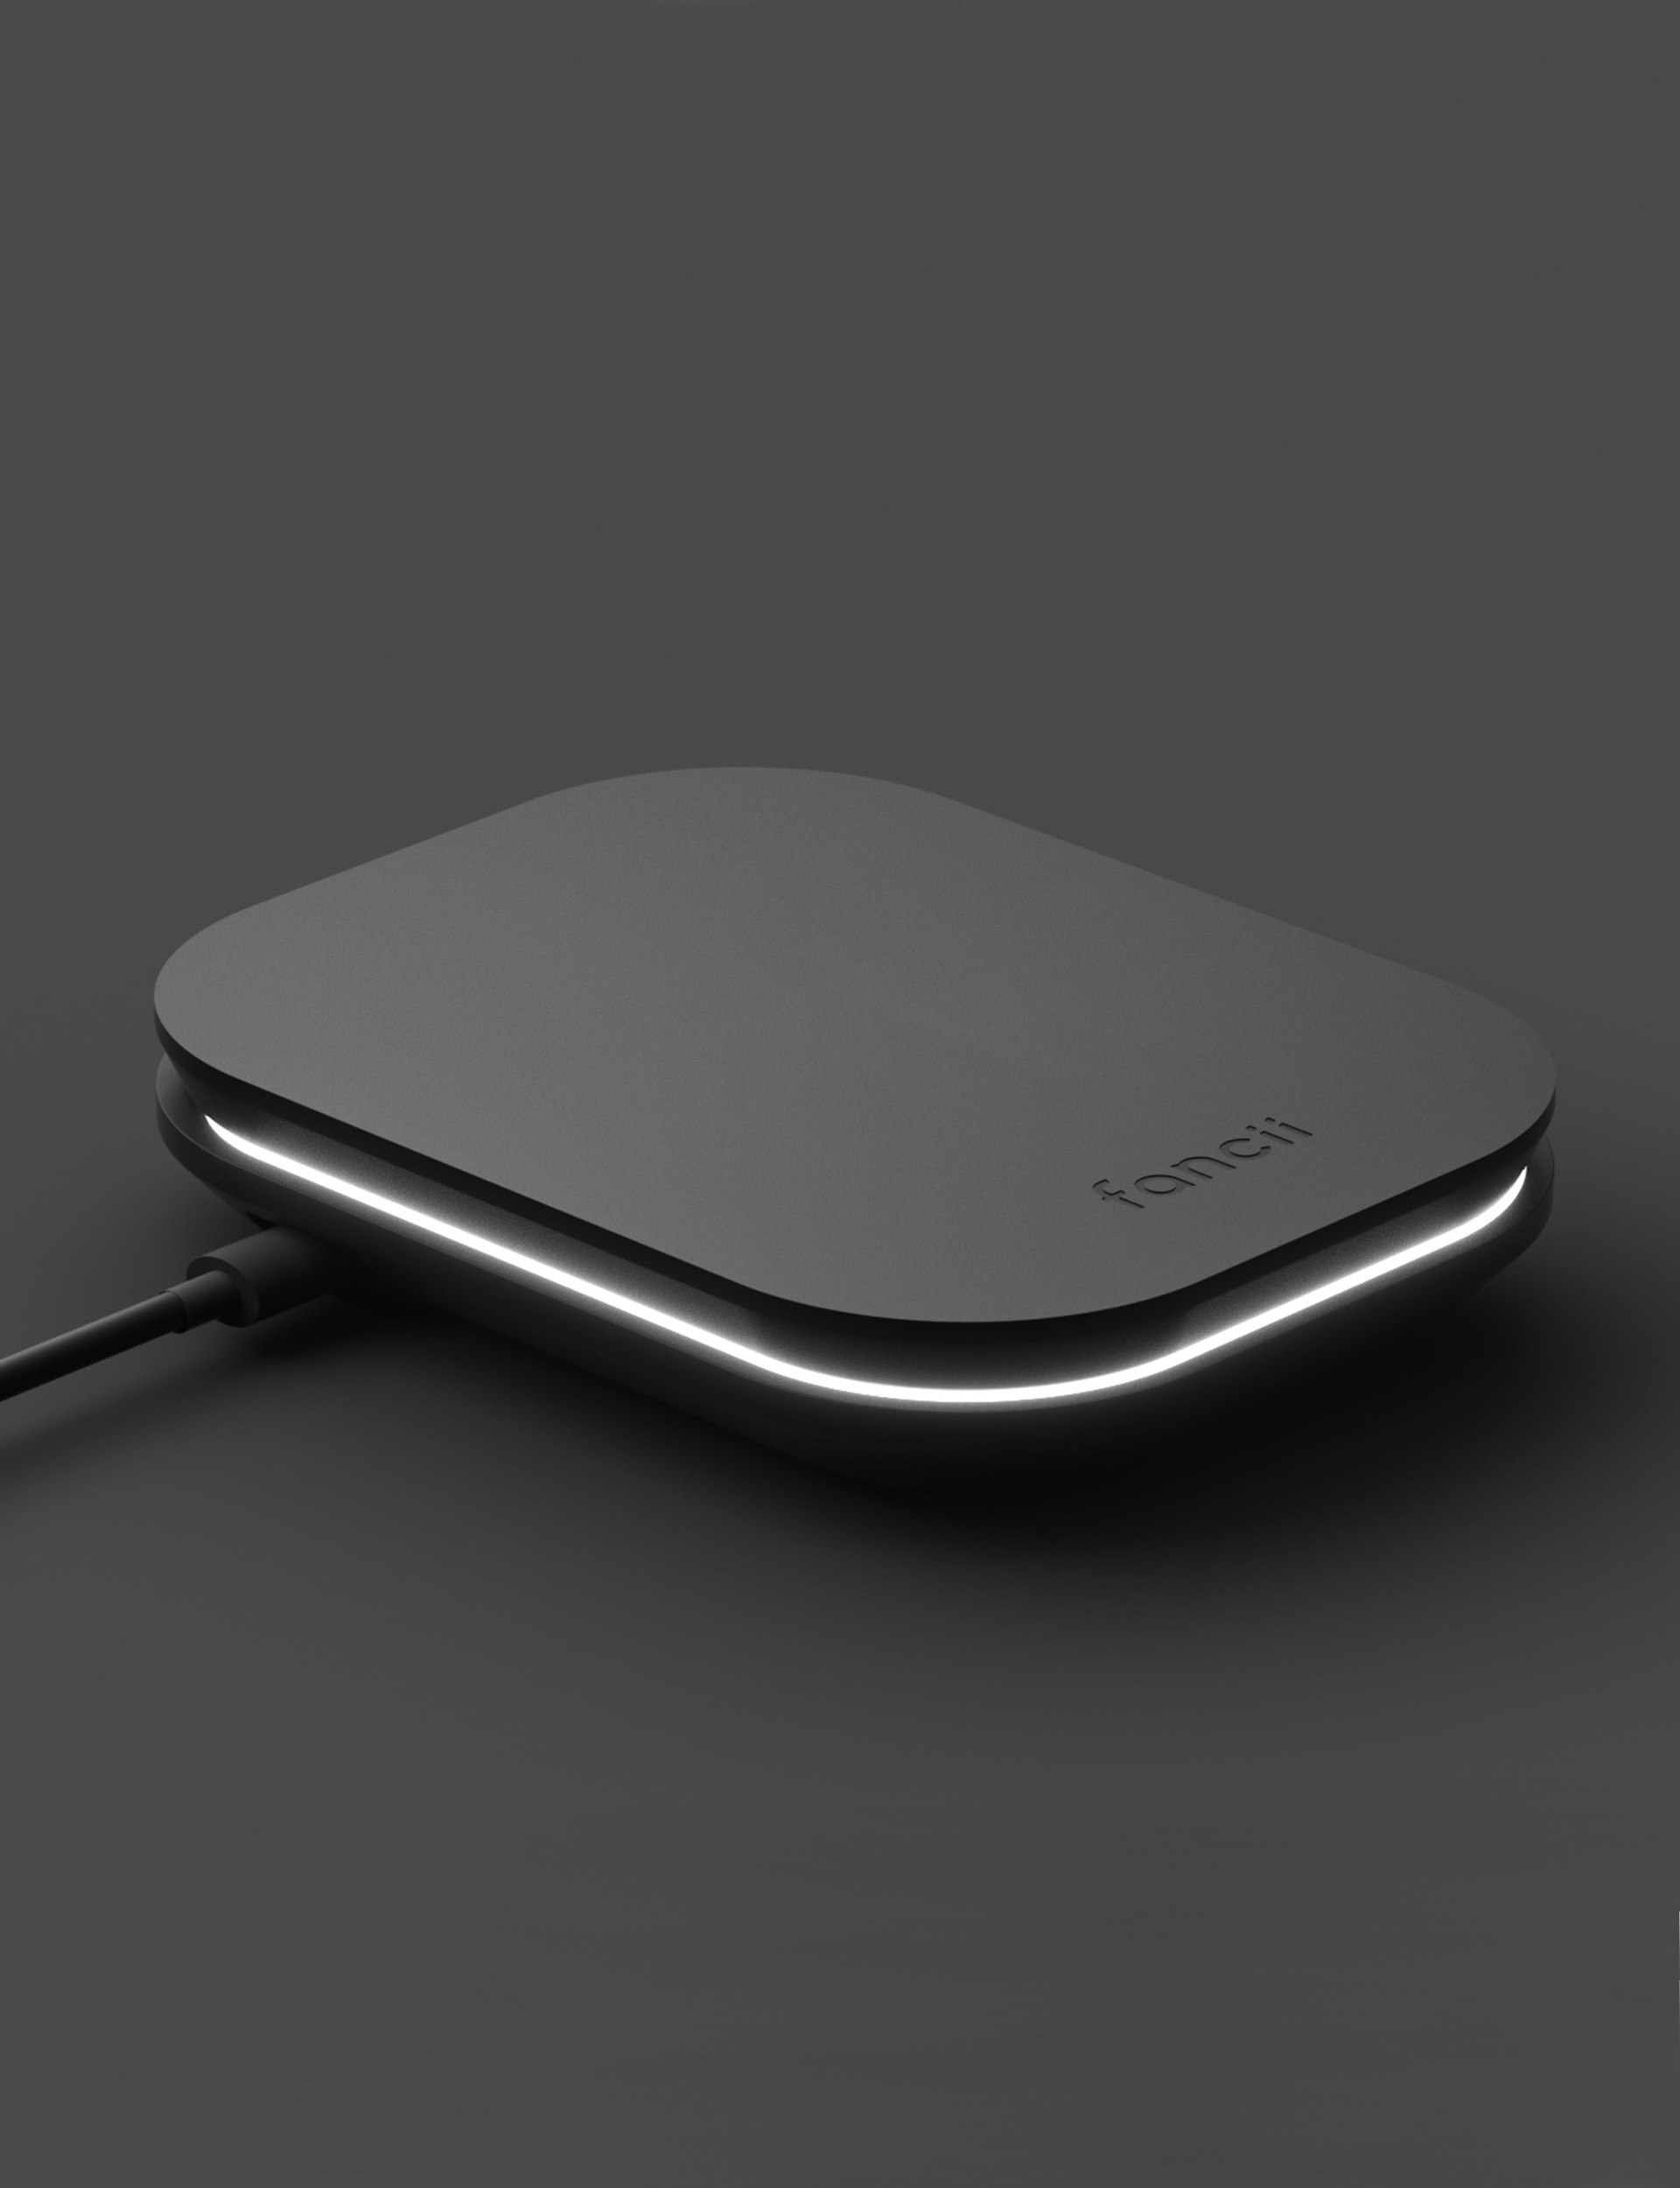 Ready to wirelessly charging the Mica led compact mirror